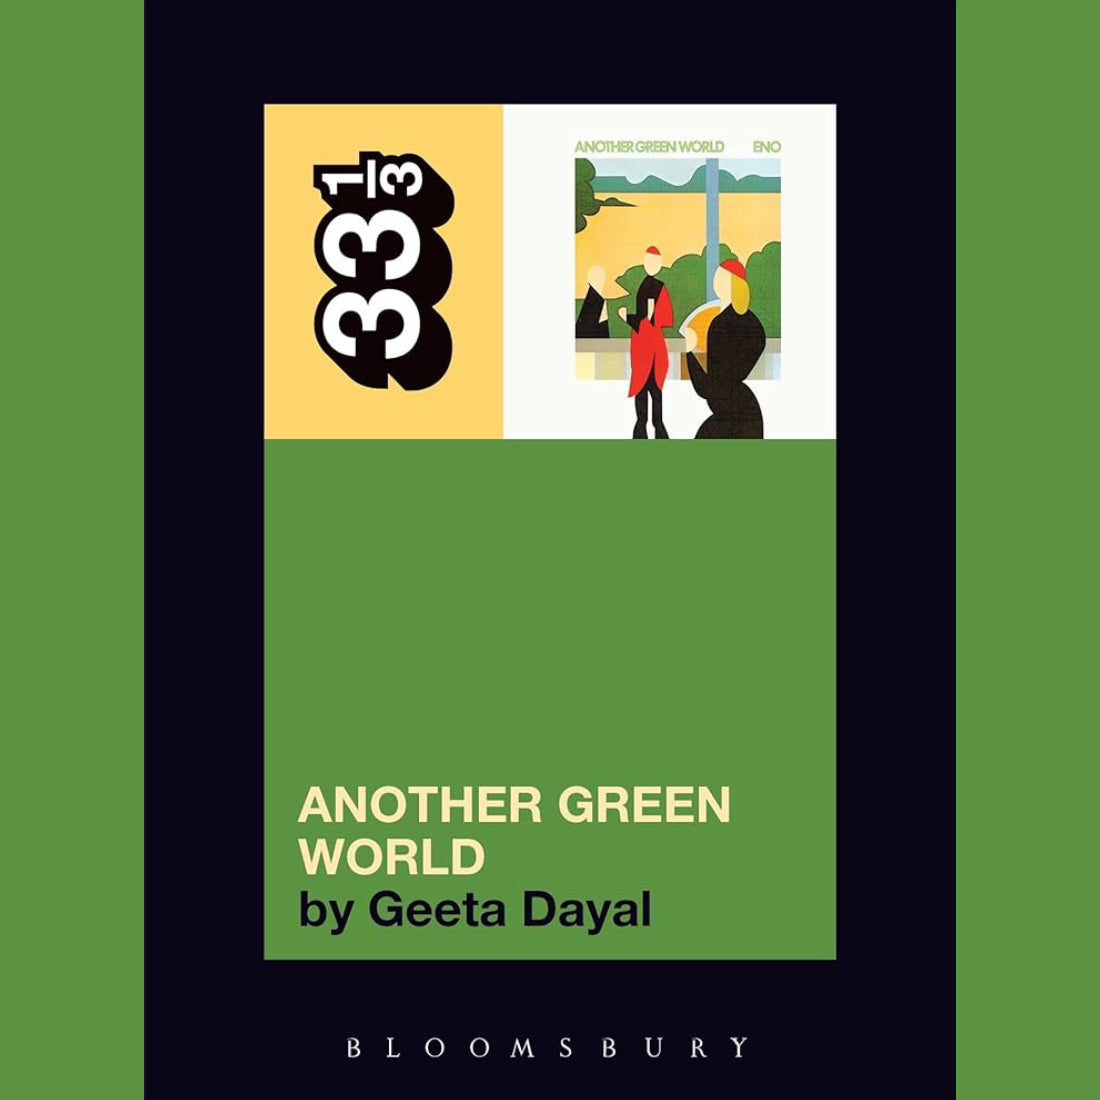 Geeta Dayal - Brian Eno's Another Green World | Buy the book from Flying Nun Records